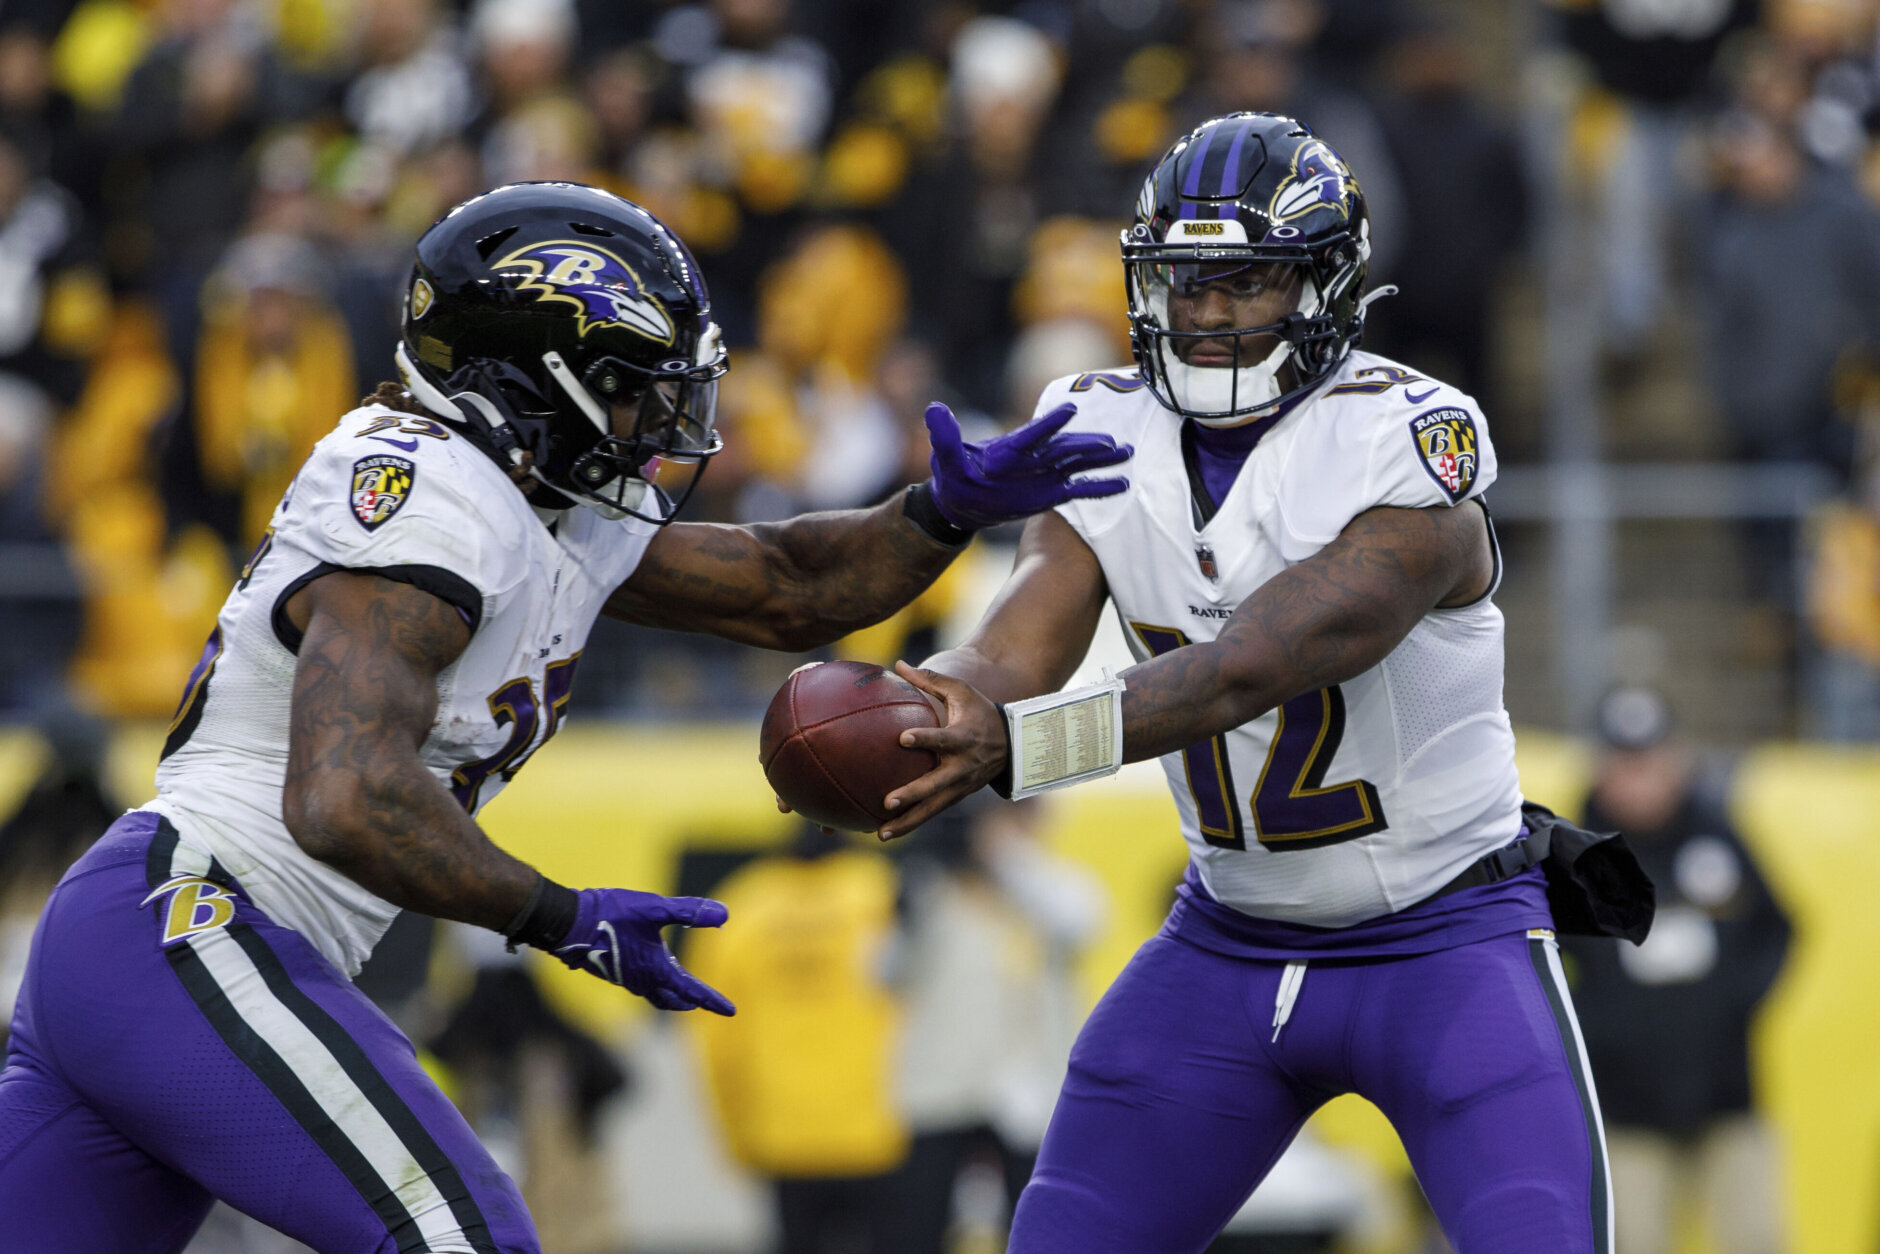 <p><em><strong>Ravens 16</strong></em><br />
<em><strong>Steelers 14</strong></em></p>
<p>Baltimore snapped the string of four straight losses to the hated Steelers, but the win in Pittsburgh comes at a cost. I trust Tyler Huntley to keep the Ravens flying straight while Lamar Jackson is sidelined, but I have no such confidence in undrafted rookie Anthony Brown. Baltimore might have to run a triple option offense and stay stout on defense (the Ravens have held four of their last five opponents to 14 points or fewer) to win in Cleveland on Saturday.</p>
